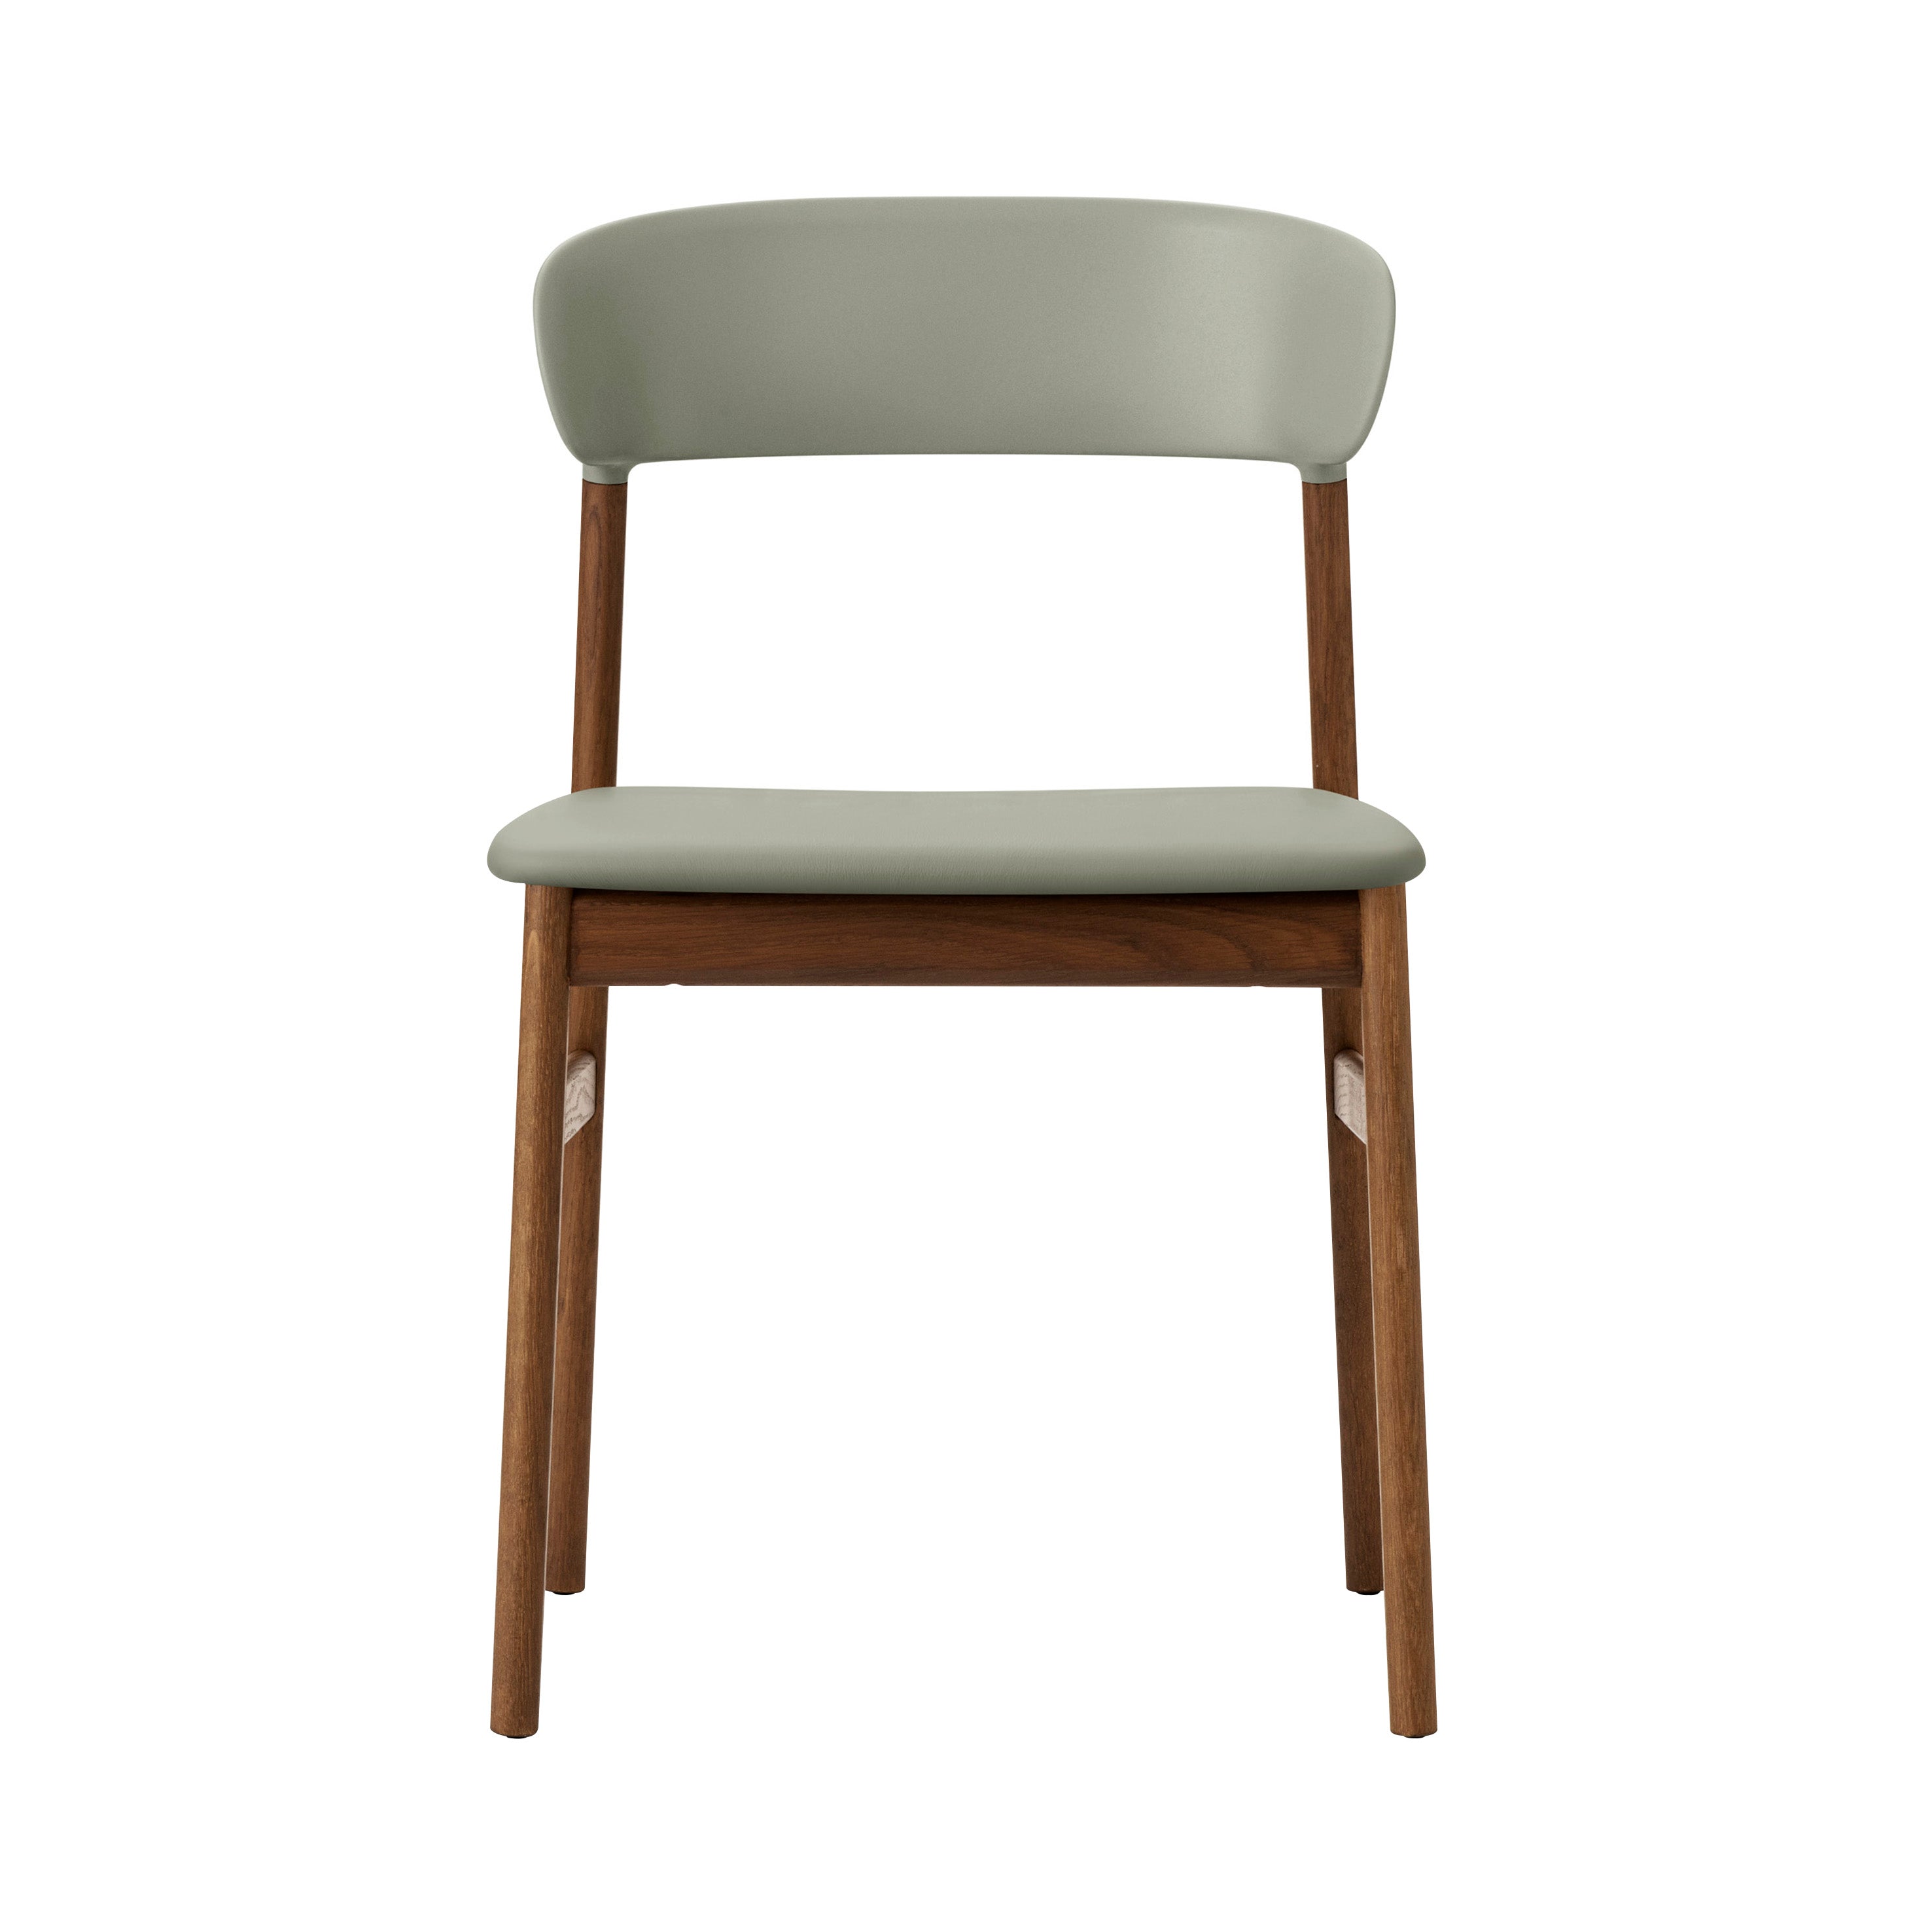 Herit Chair: Upholstered + Smoked Oak + Dusty Green + Spectrum Leather Dusty Green